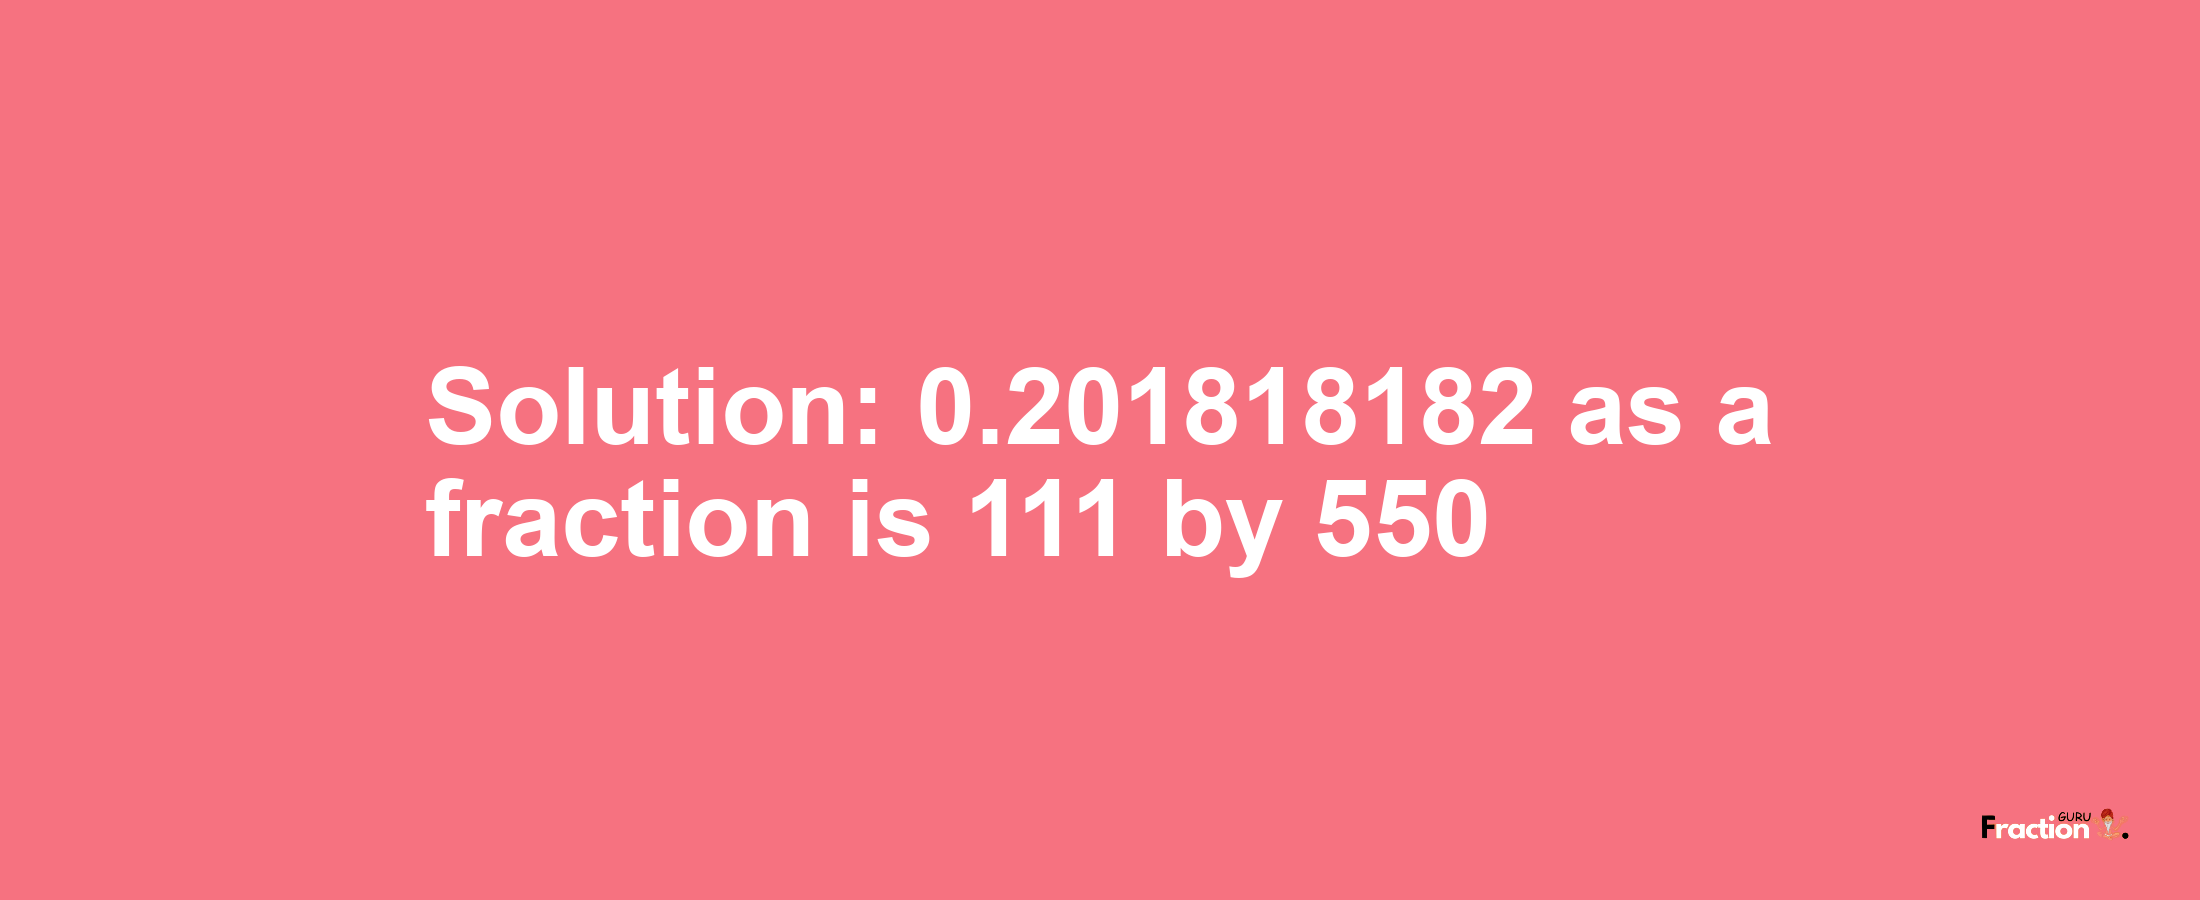 Solution:0.201818182 as a fraction is 111/550